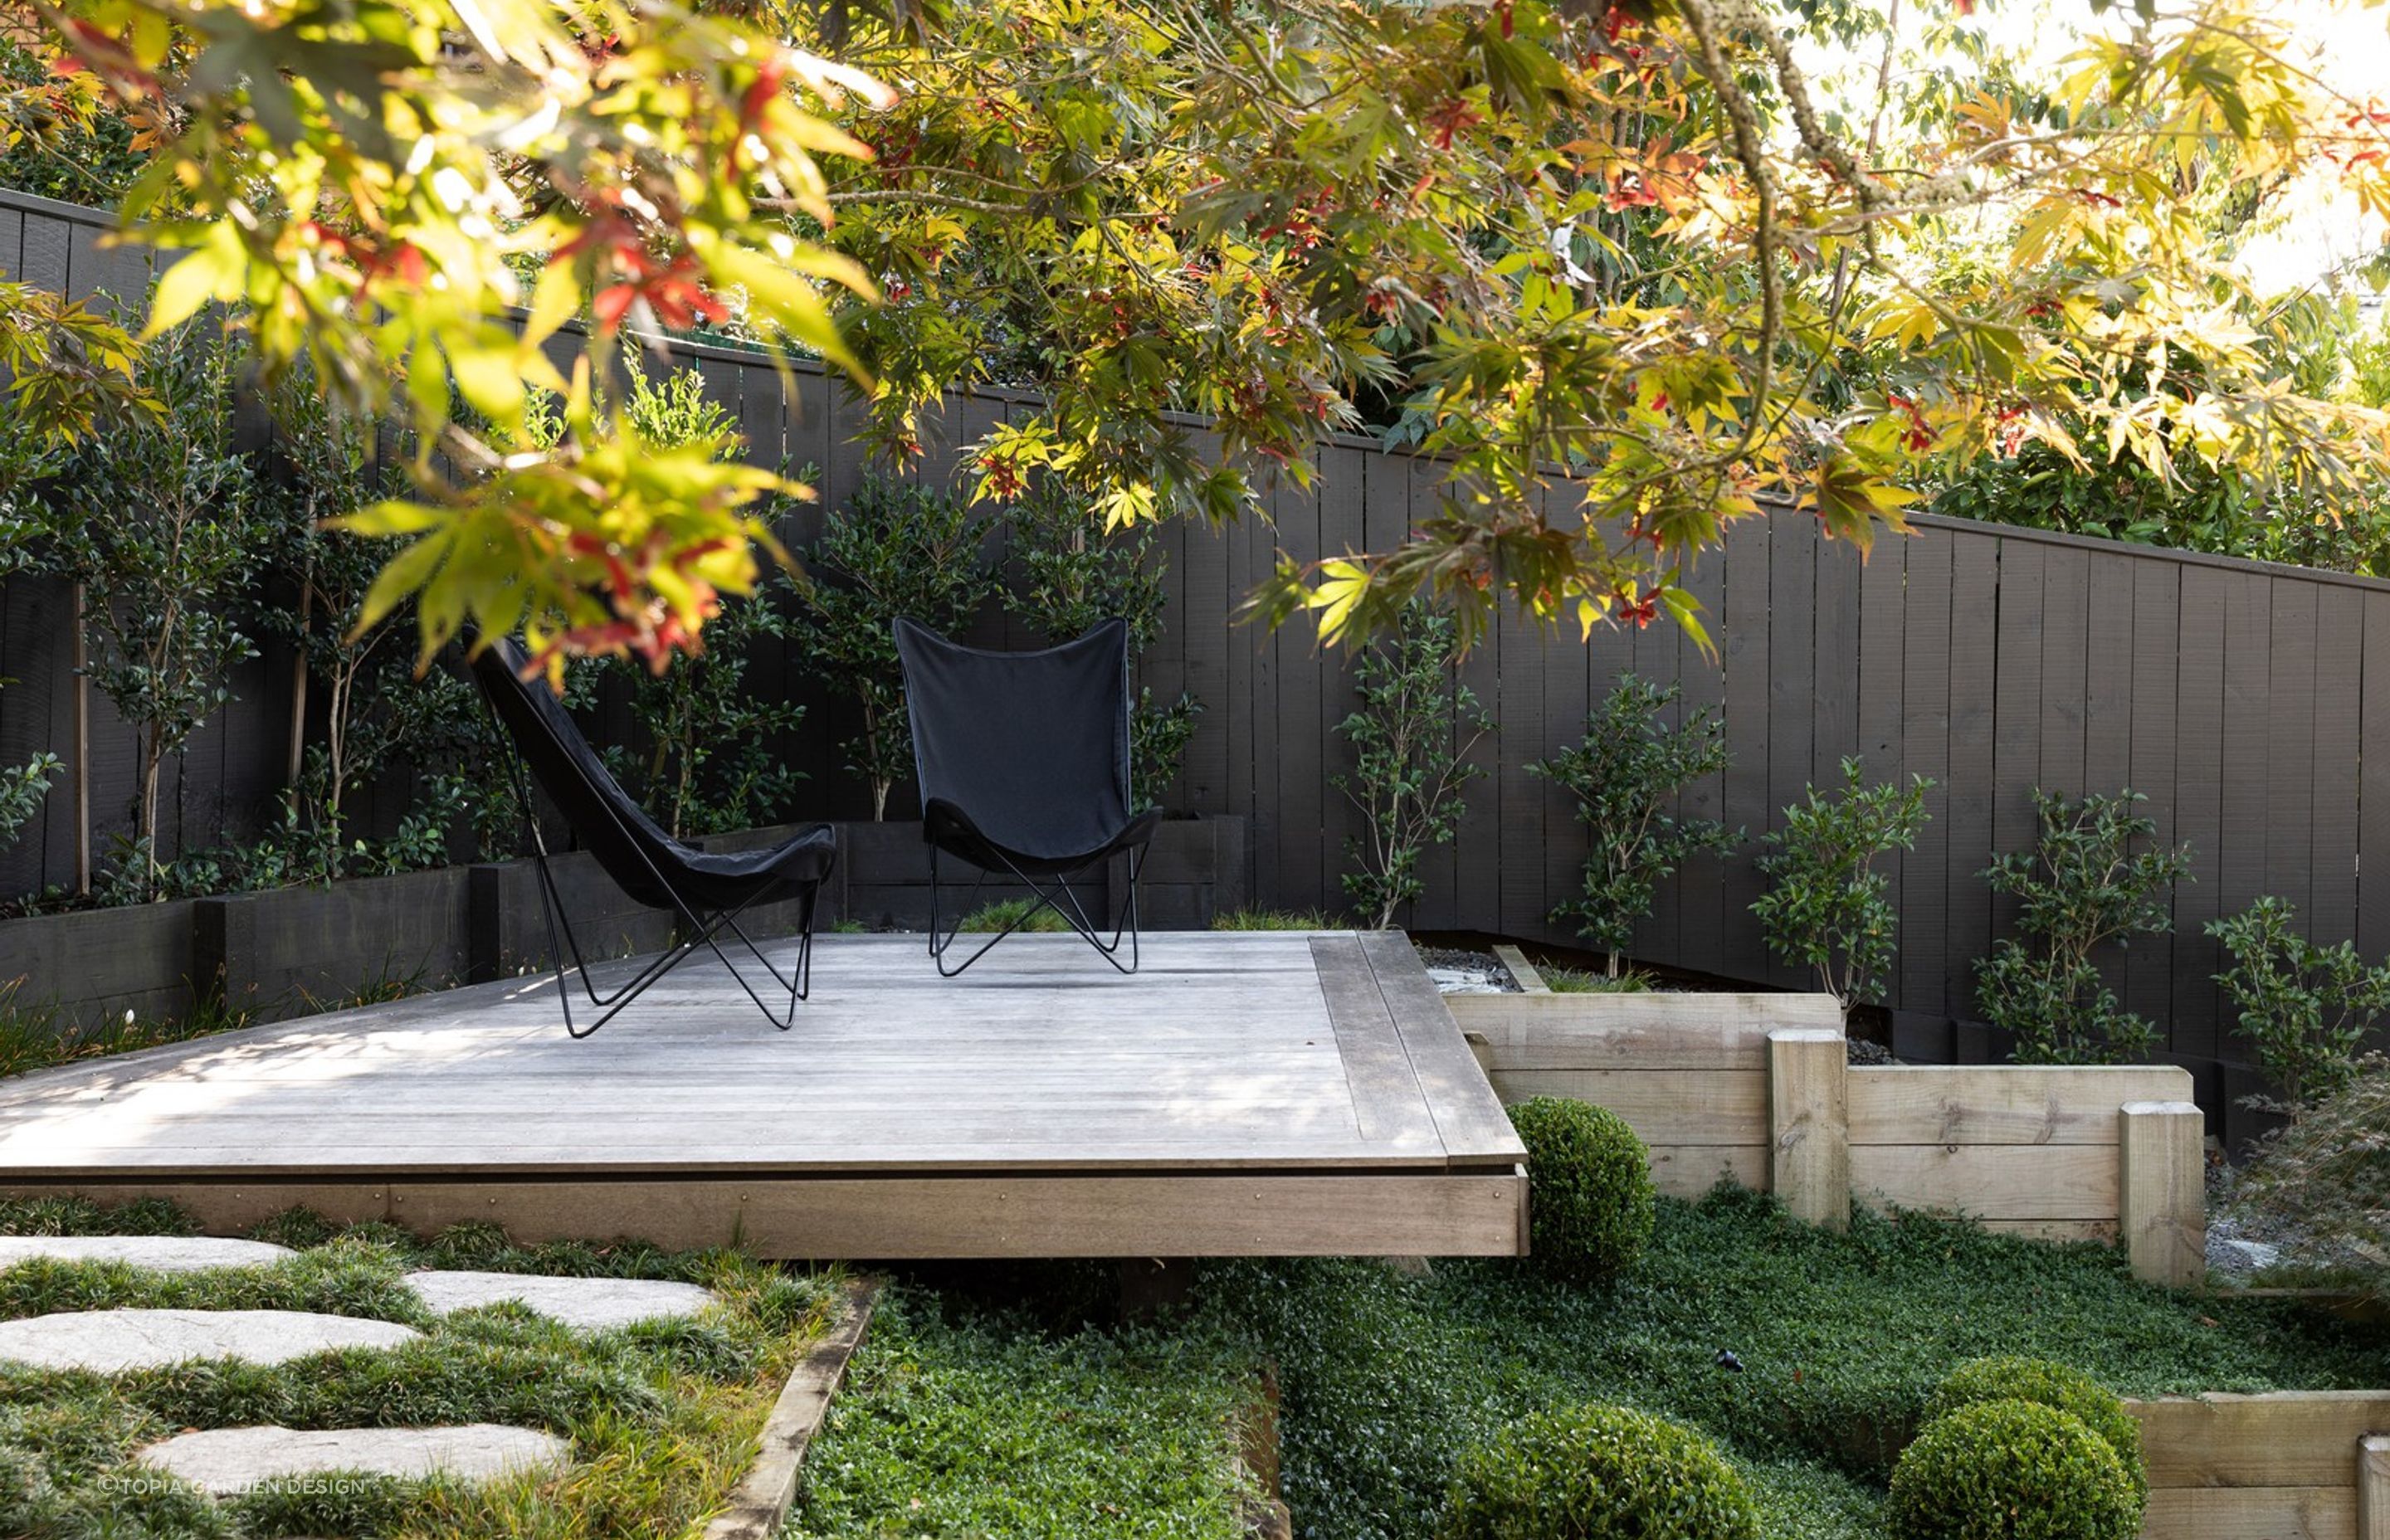 Hardscaping can be used to create sanctuaries of solitude, like this delightful space here in Crocus Place.